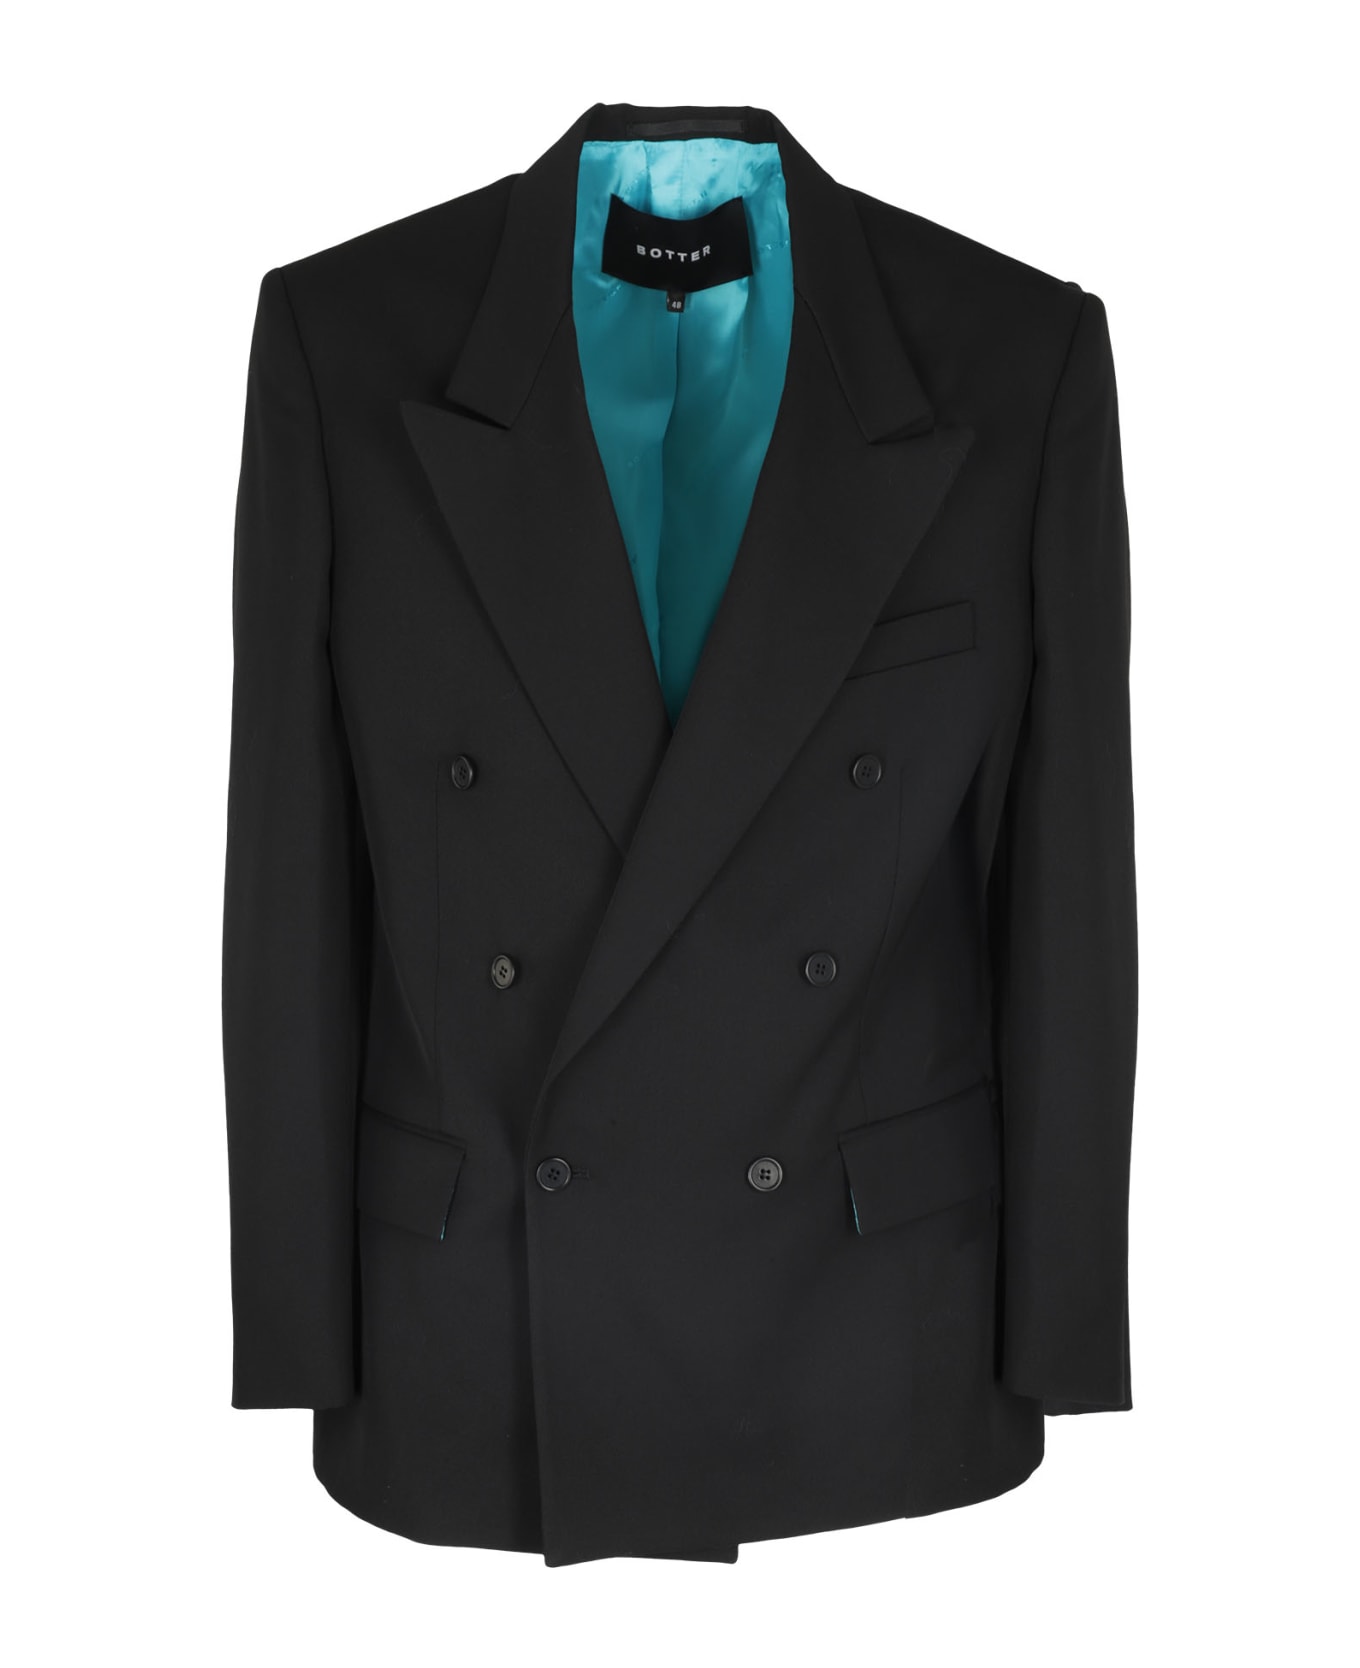 Botter Double Breasted Classic Blazer - Wool Suit Black